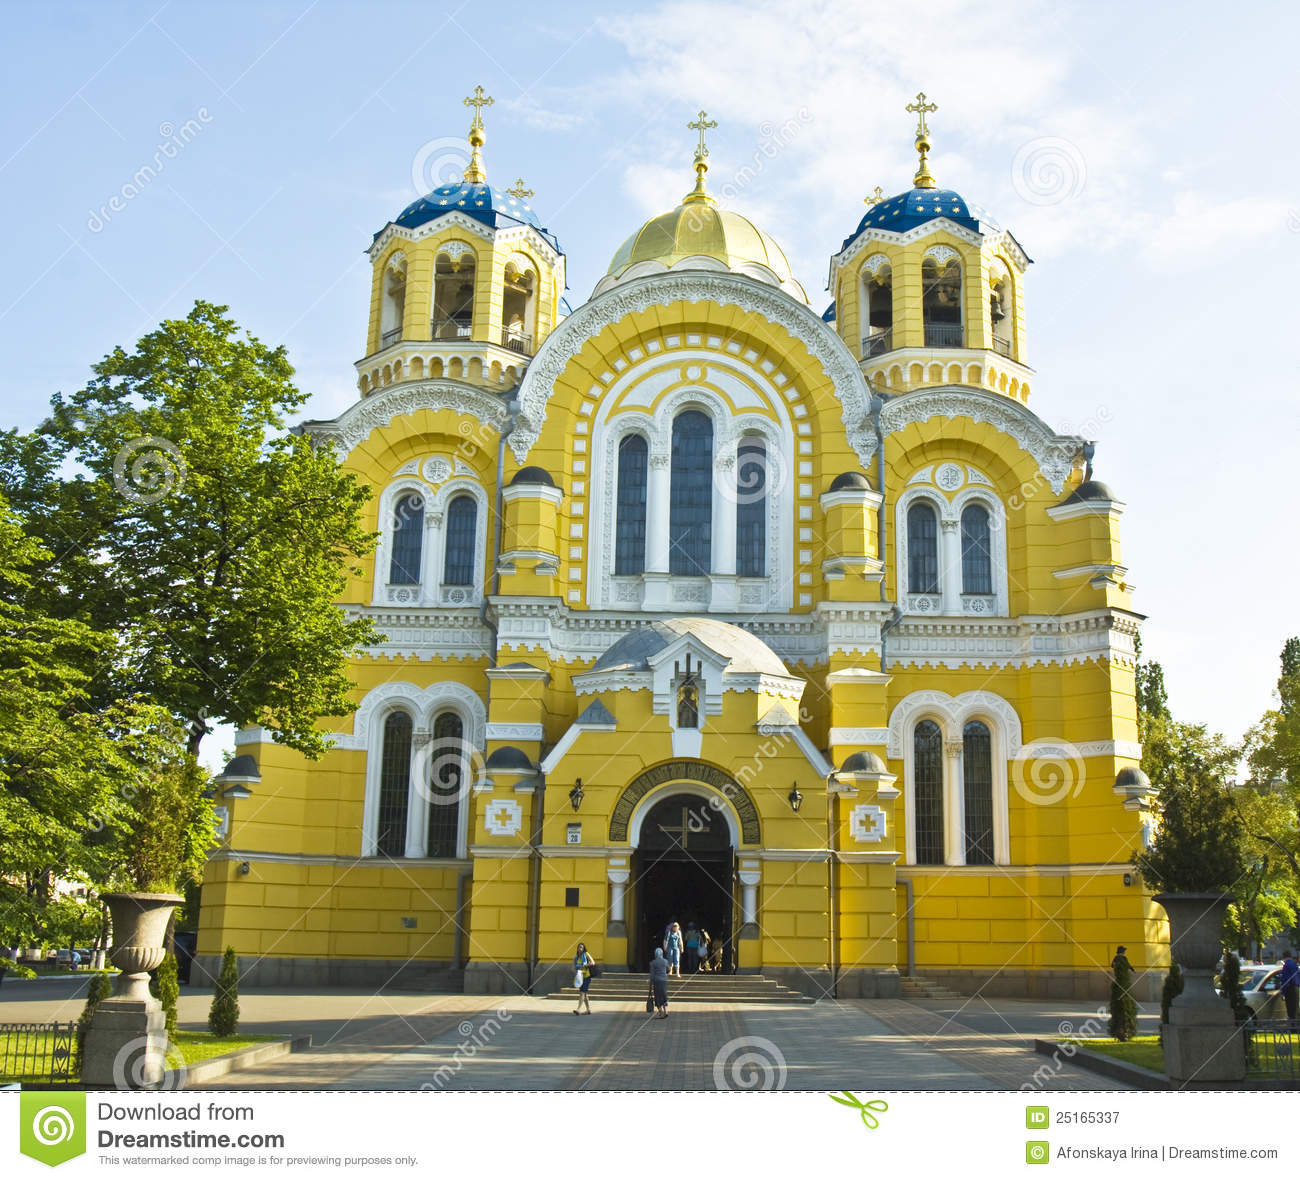 St Vladimir Cathedral Stock Photos, Images, & Pictures.